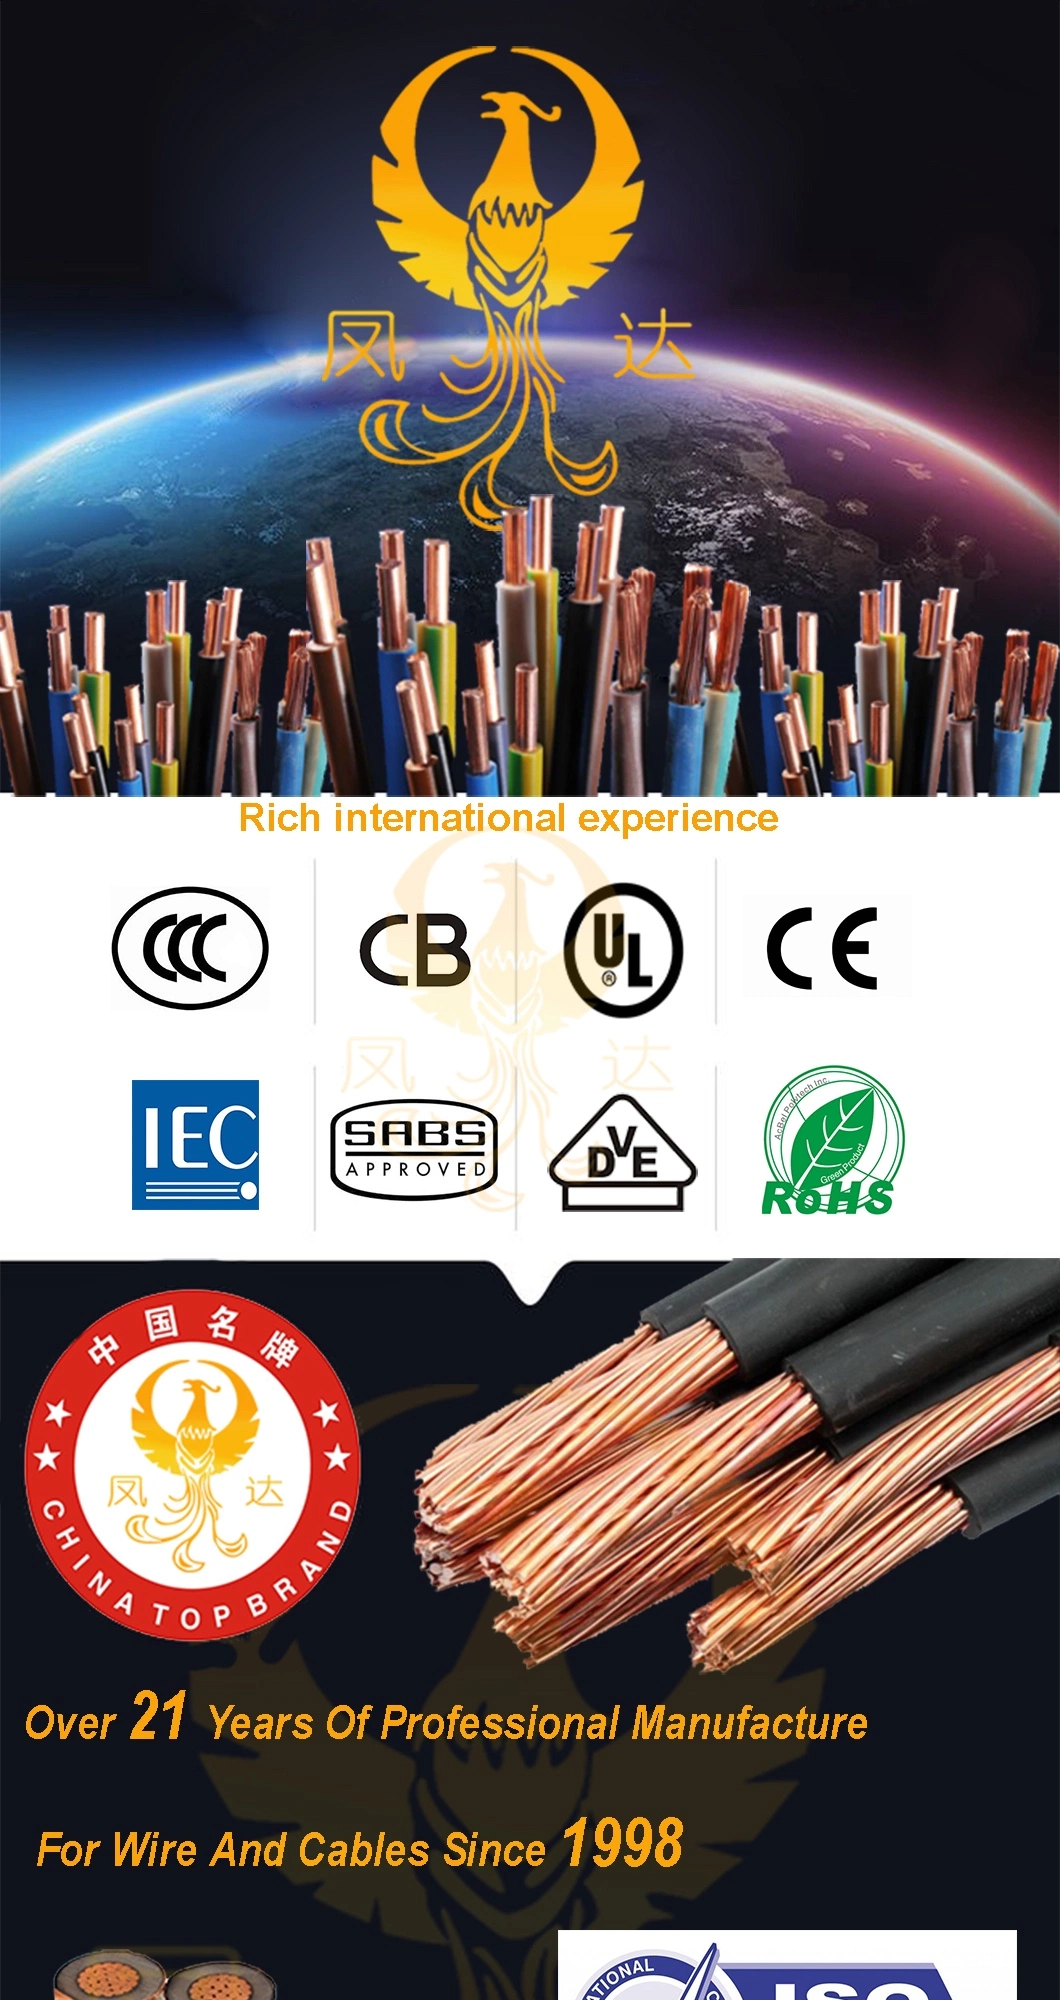 Non-Metallic Sheathed Cable Residential Indoor Wire Household 14/2 Electric Cable12/2 Nmd90